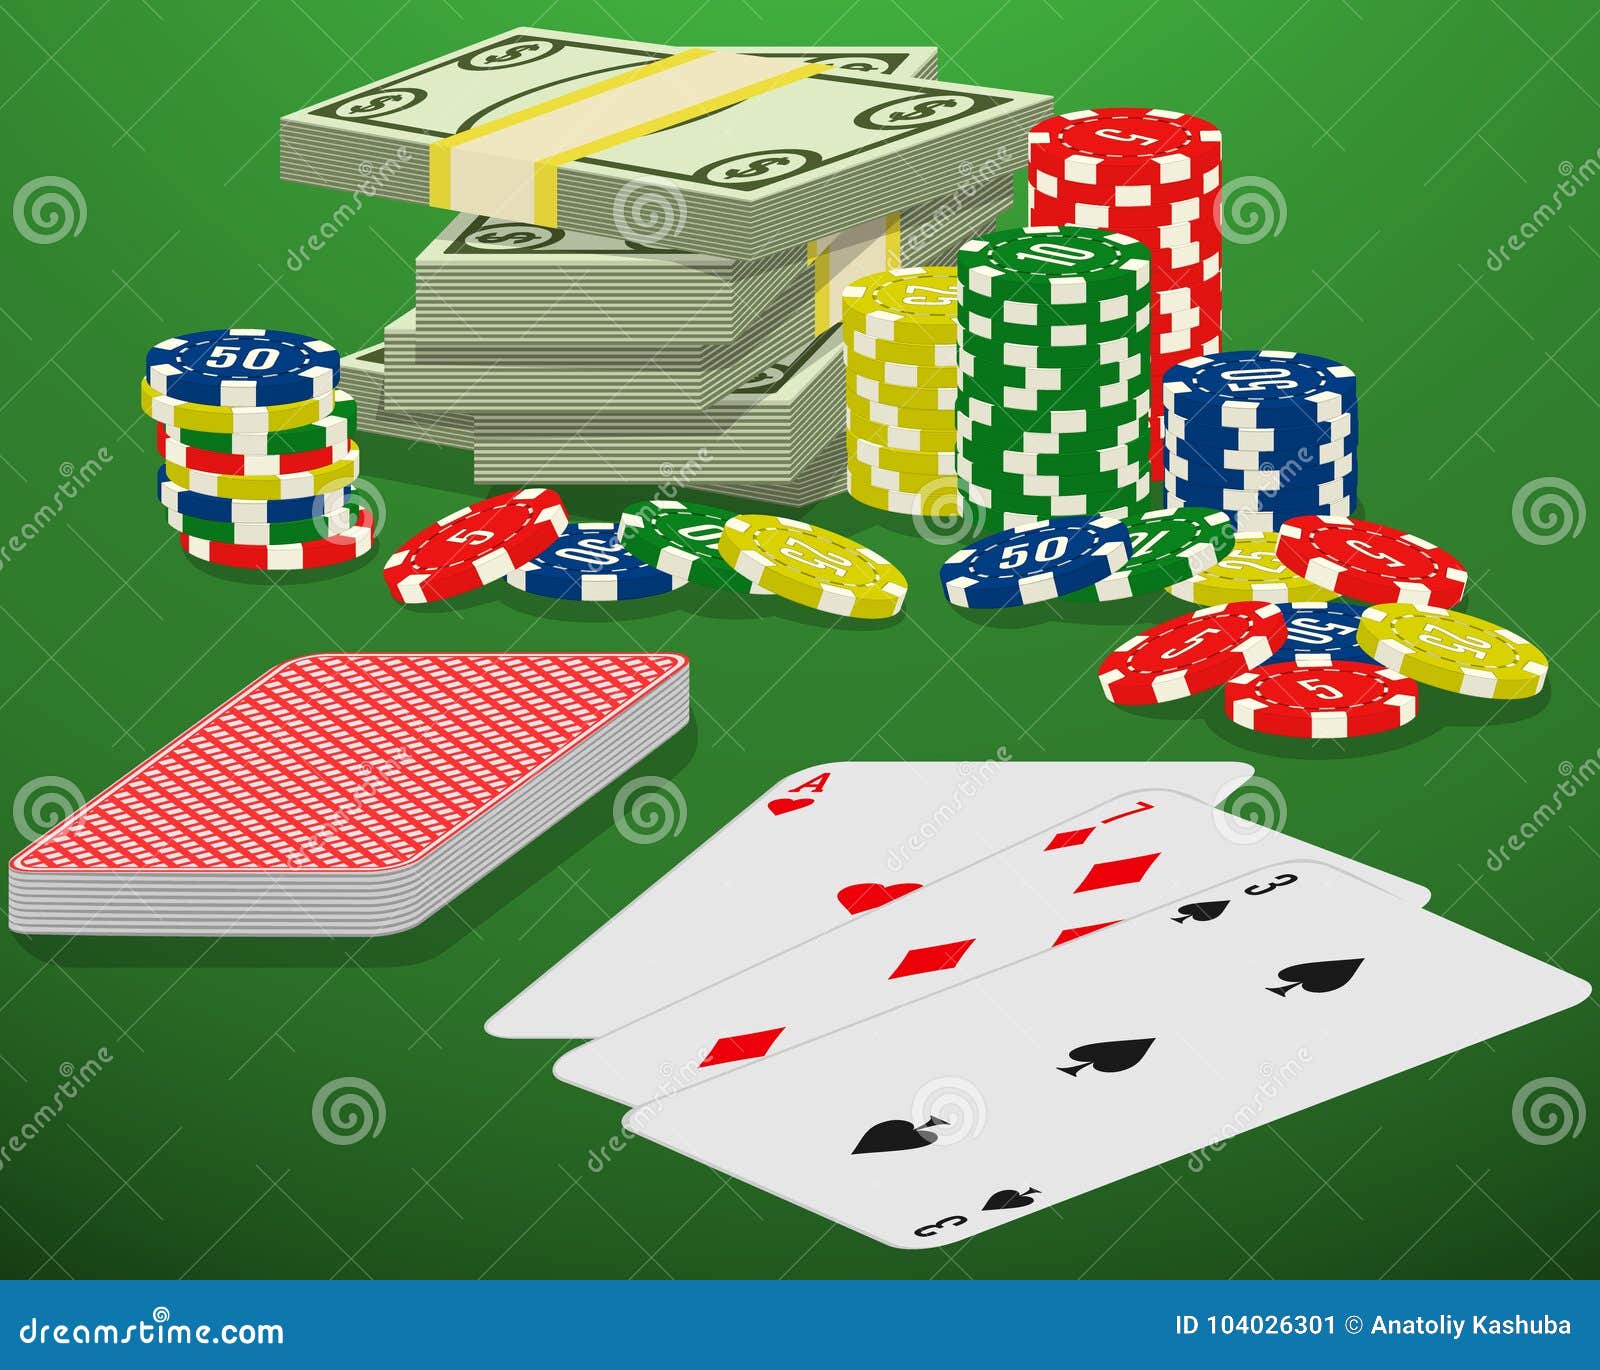 playing cards, casino chips and bundle of money on a green gambling table. blackjack, card deck and cash winnings.